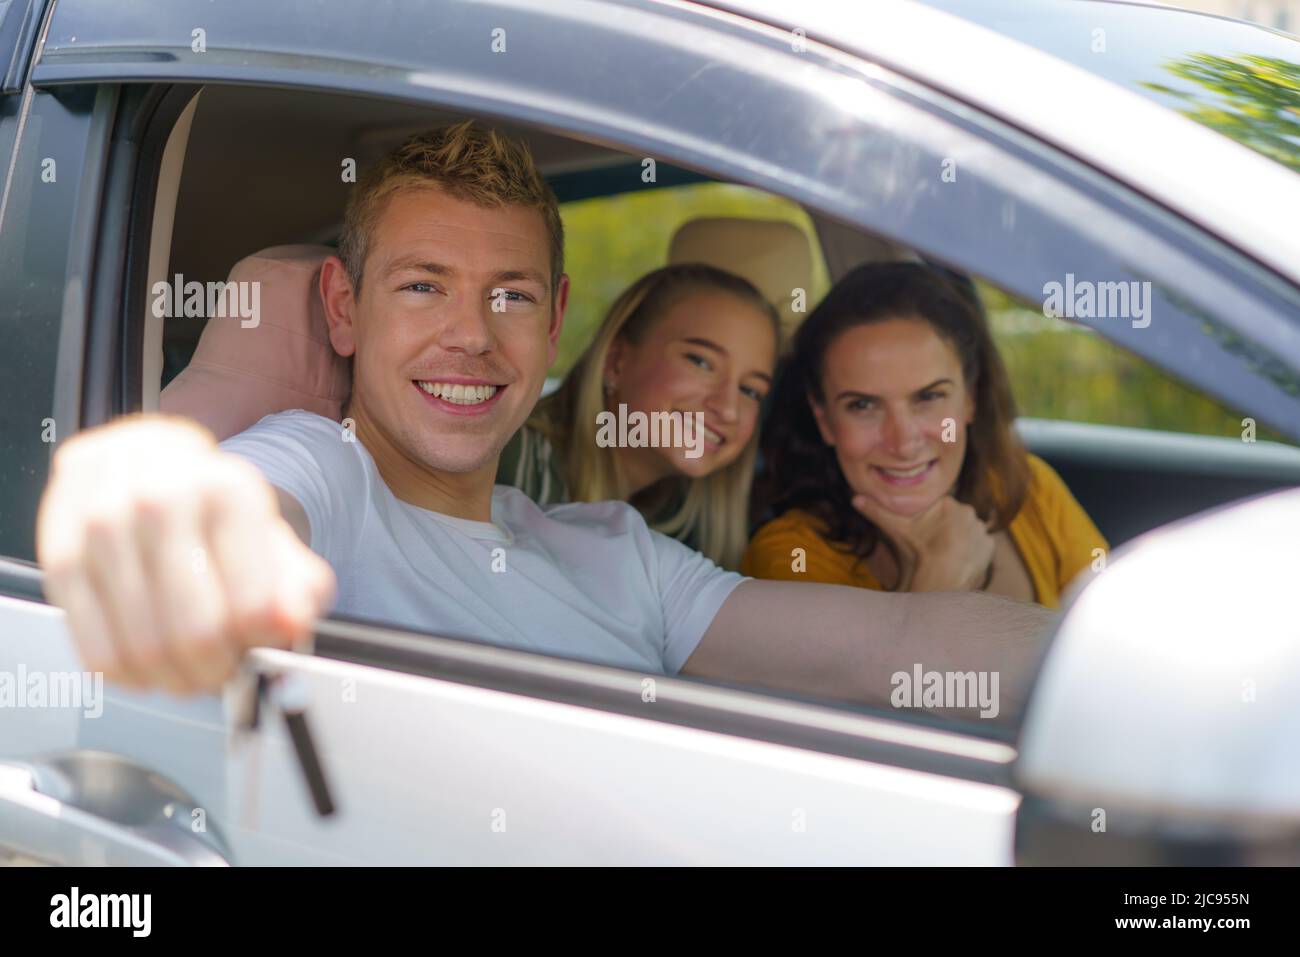 Caucasian man buying new or rent car and showing the key, sitting in car. Stock Photo